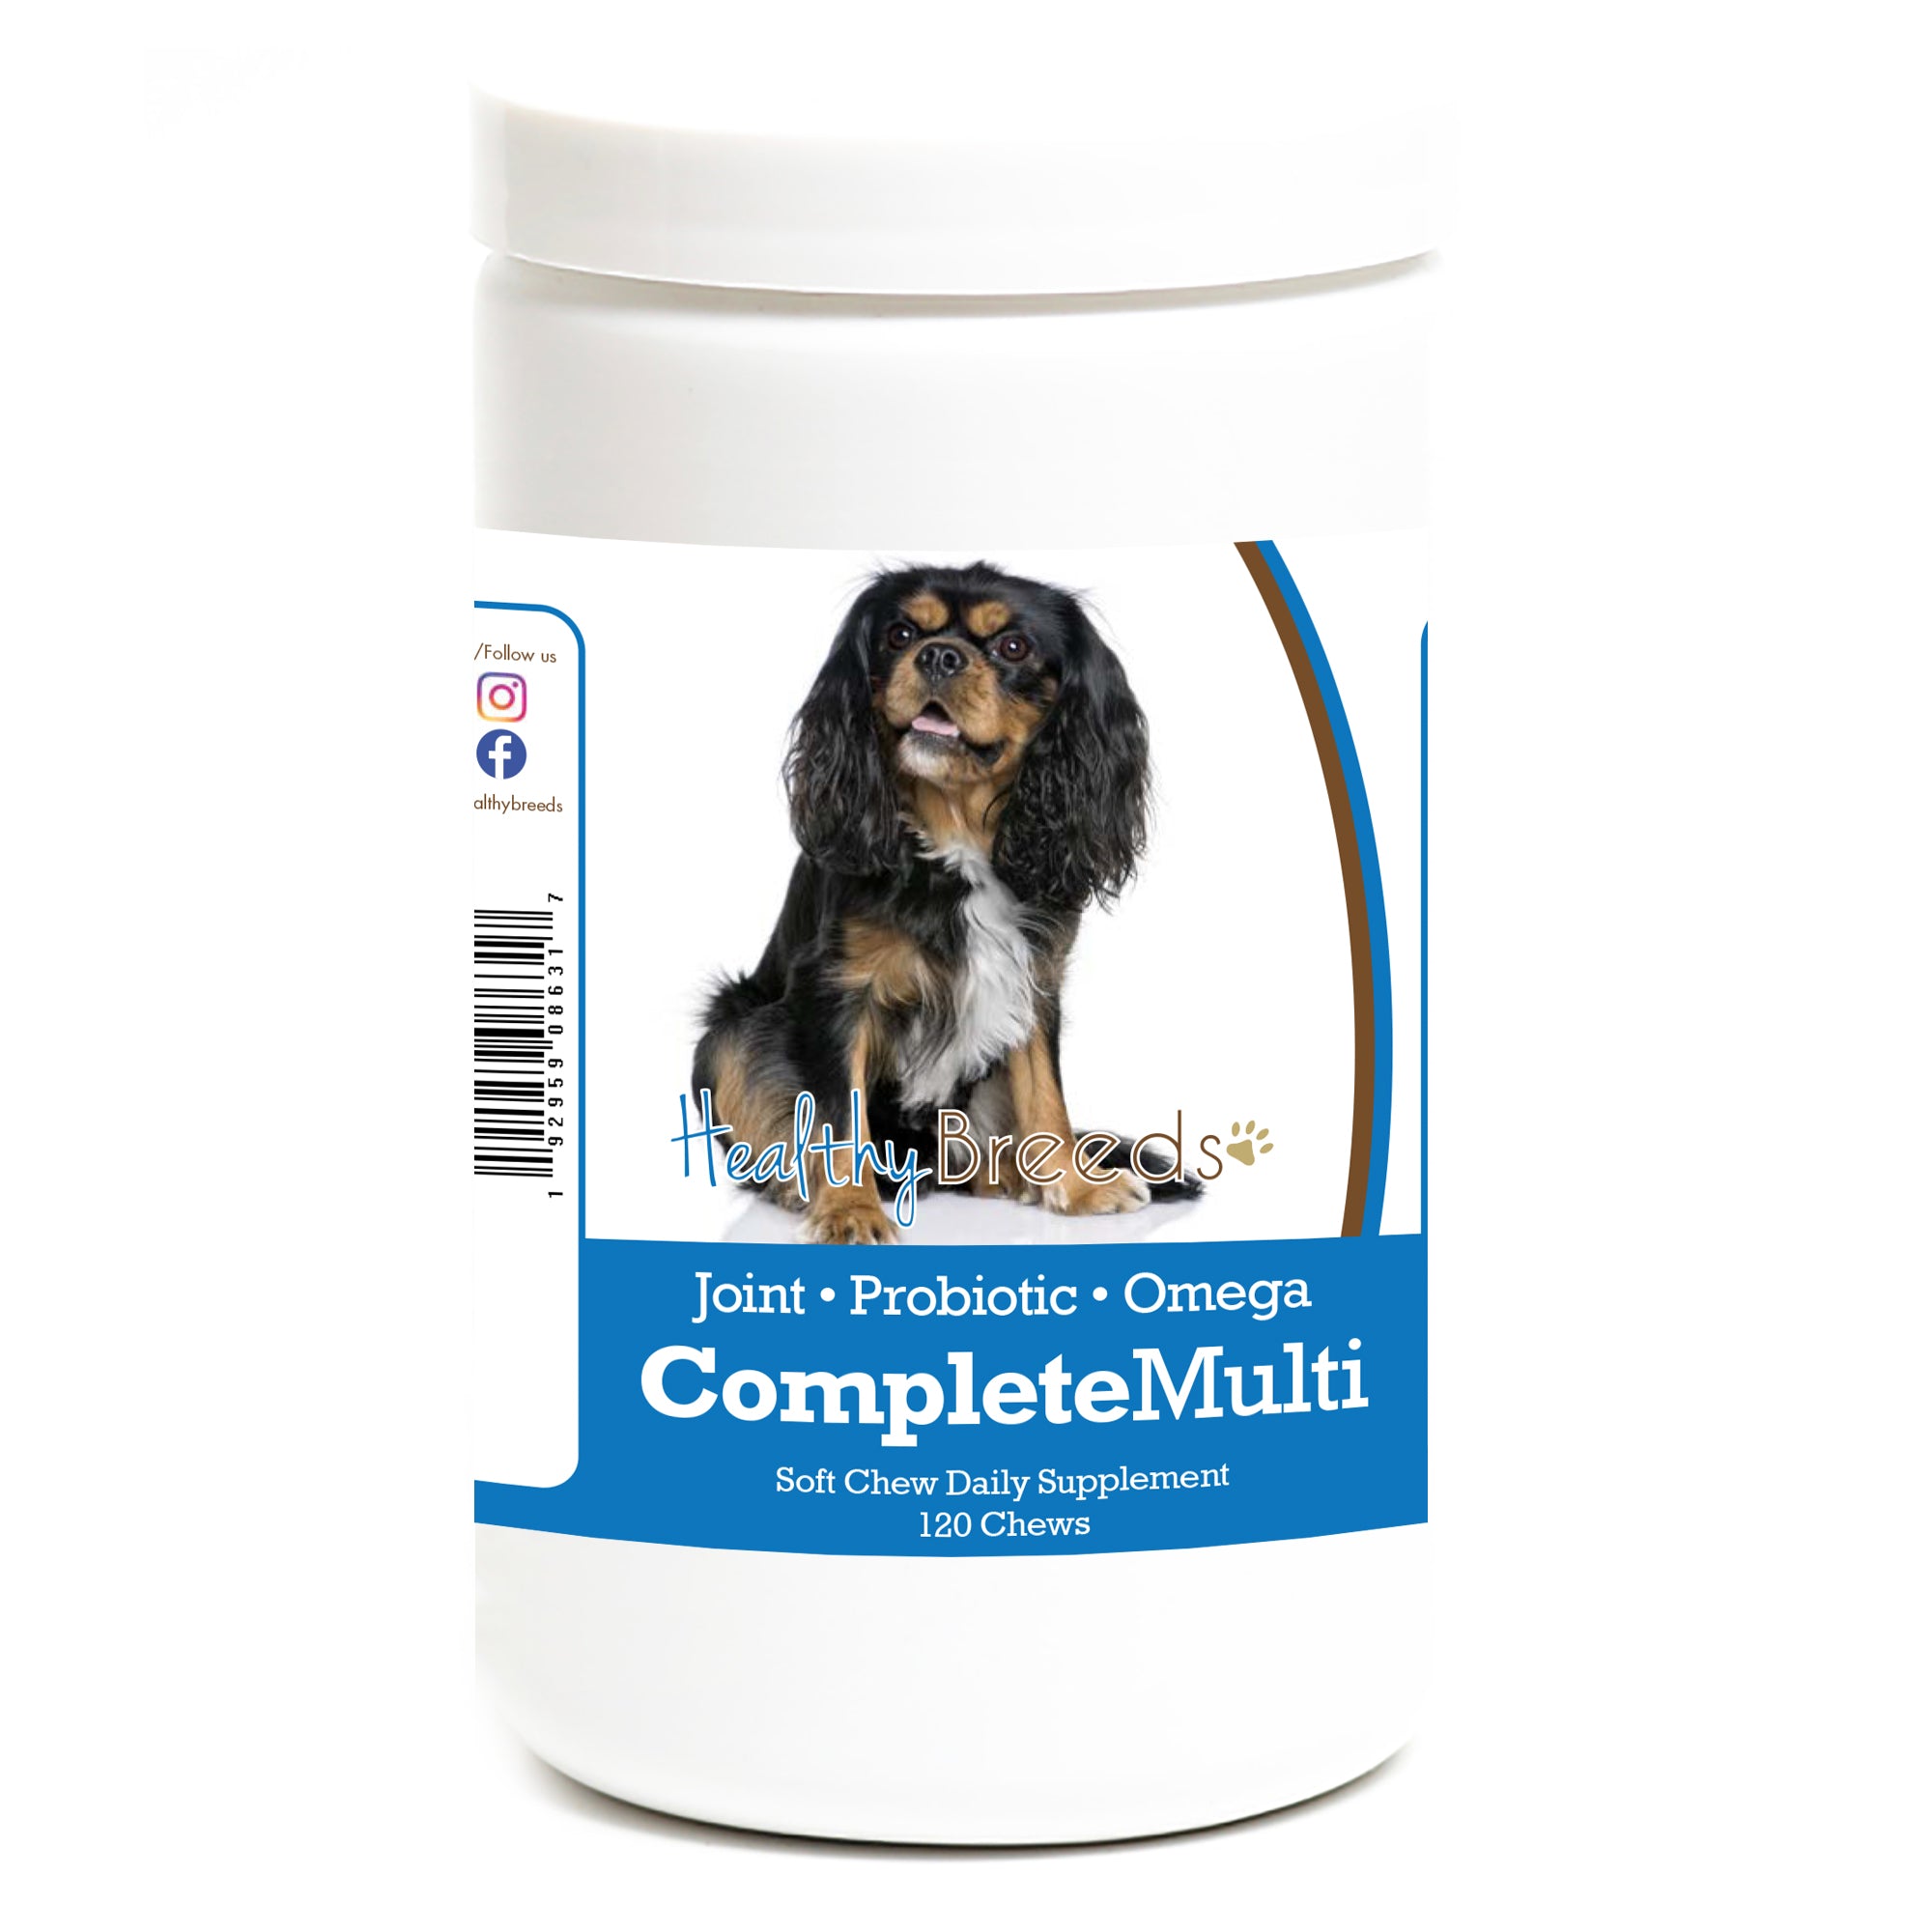 Cavalier King Charles Spaniel All In One Multivitamin Soft Chew 120 Count